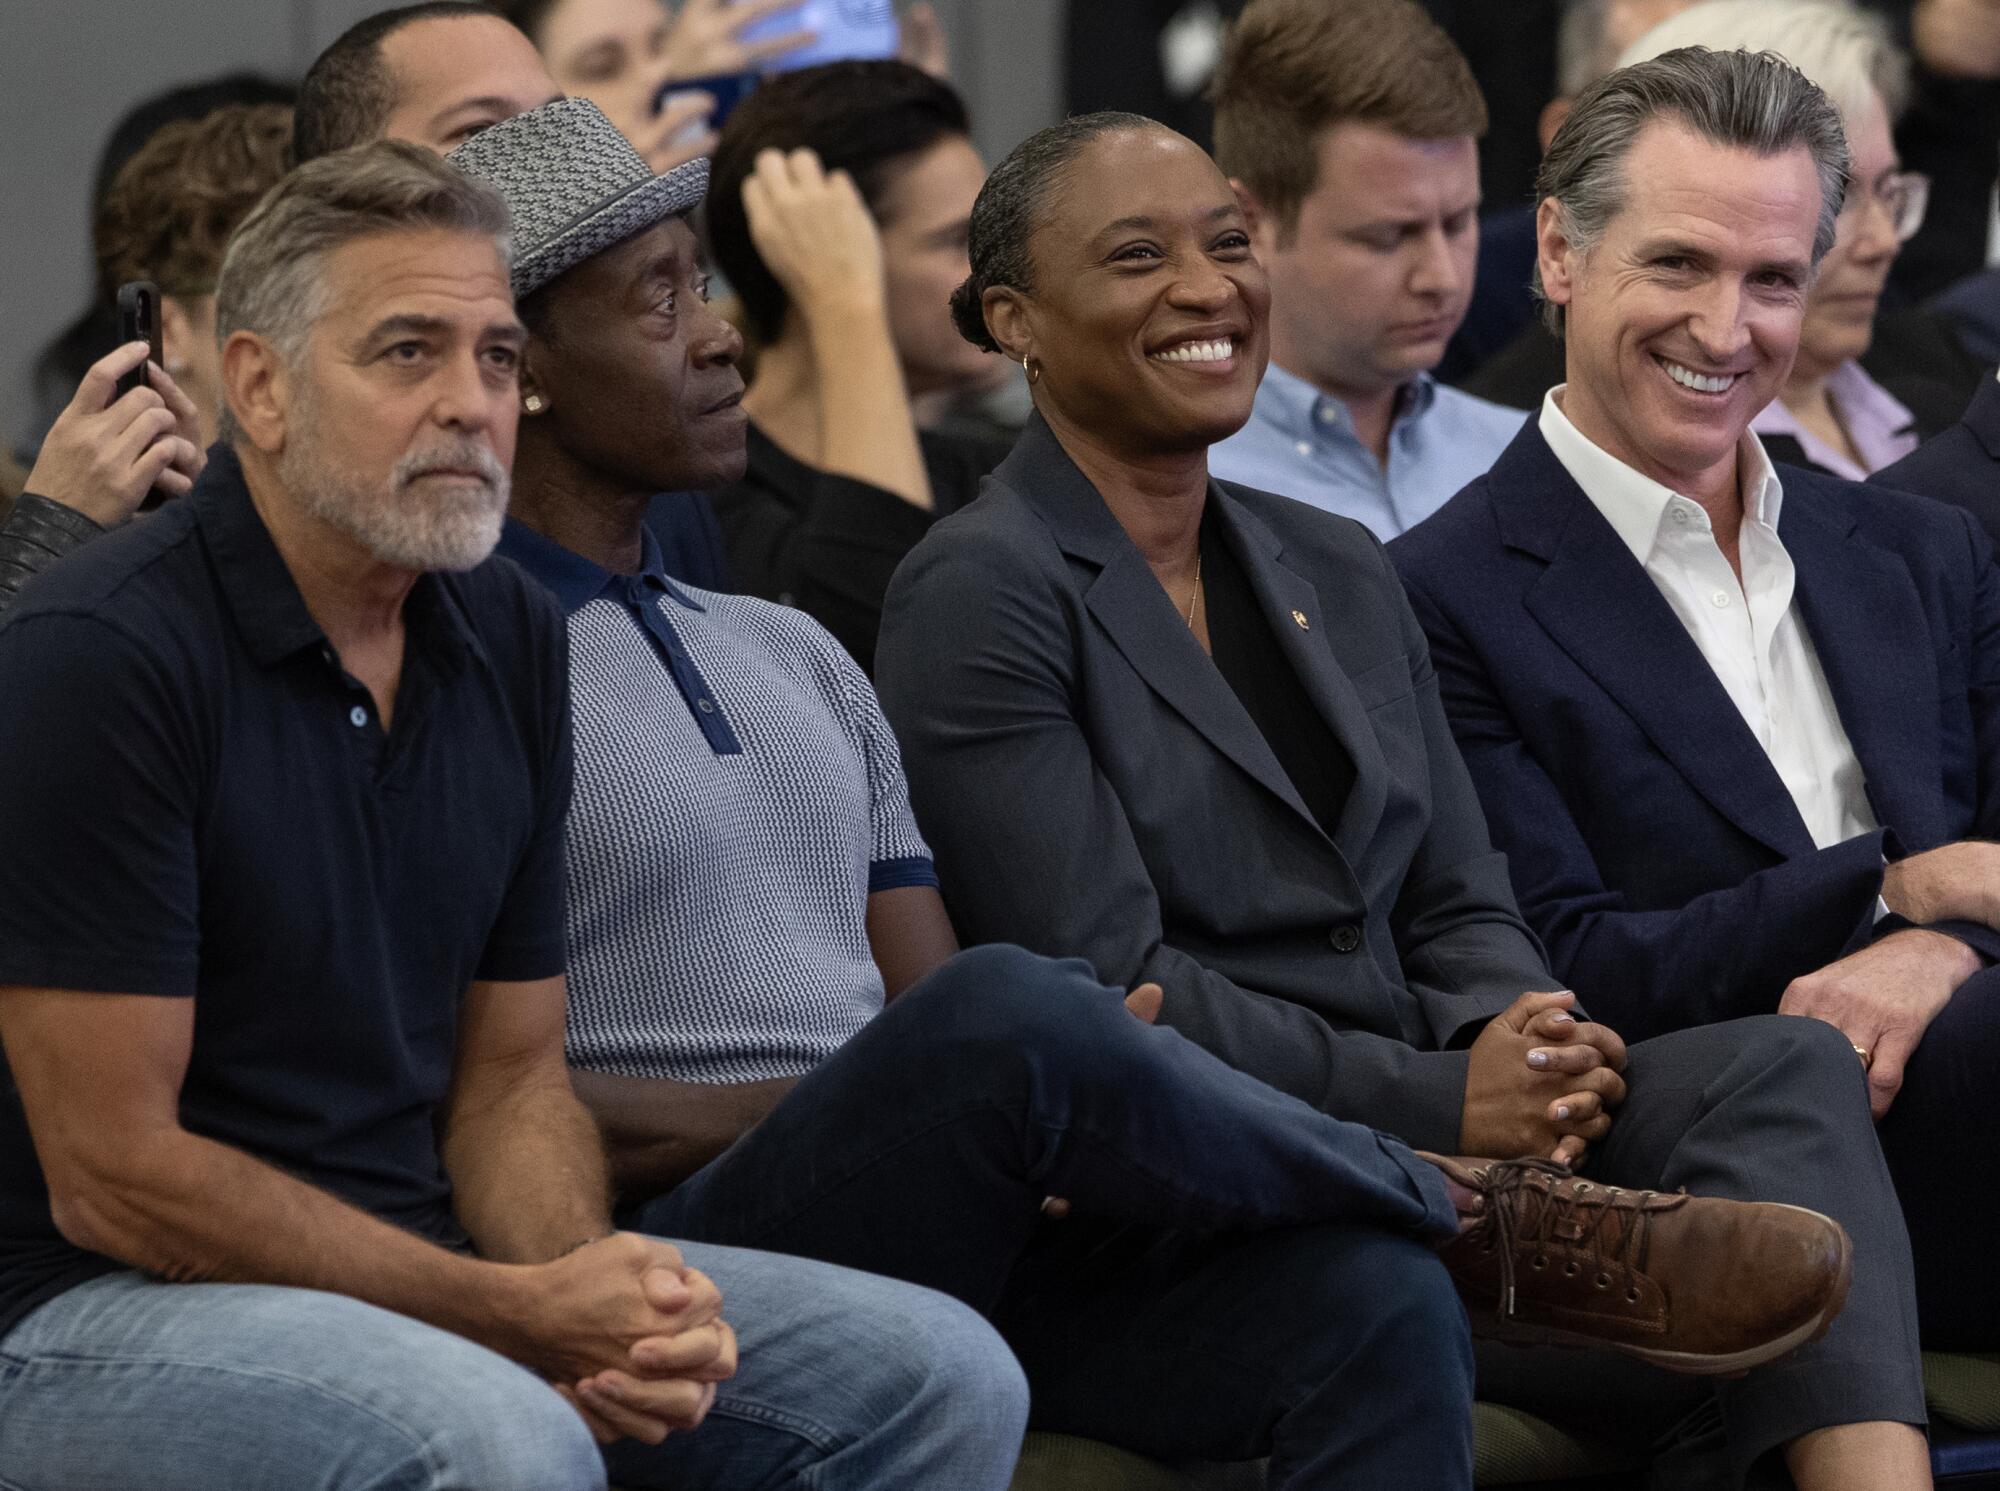 Left to right-Actor George Clooney, actor Don Cheadle, U.S. Senator Laphonza Butler, and California Governor Gavin Newsom,